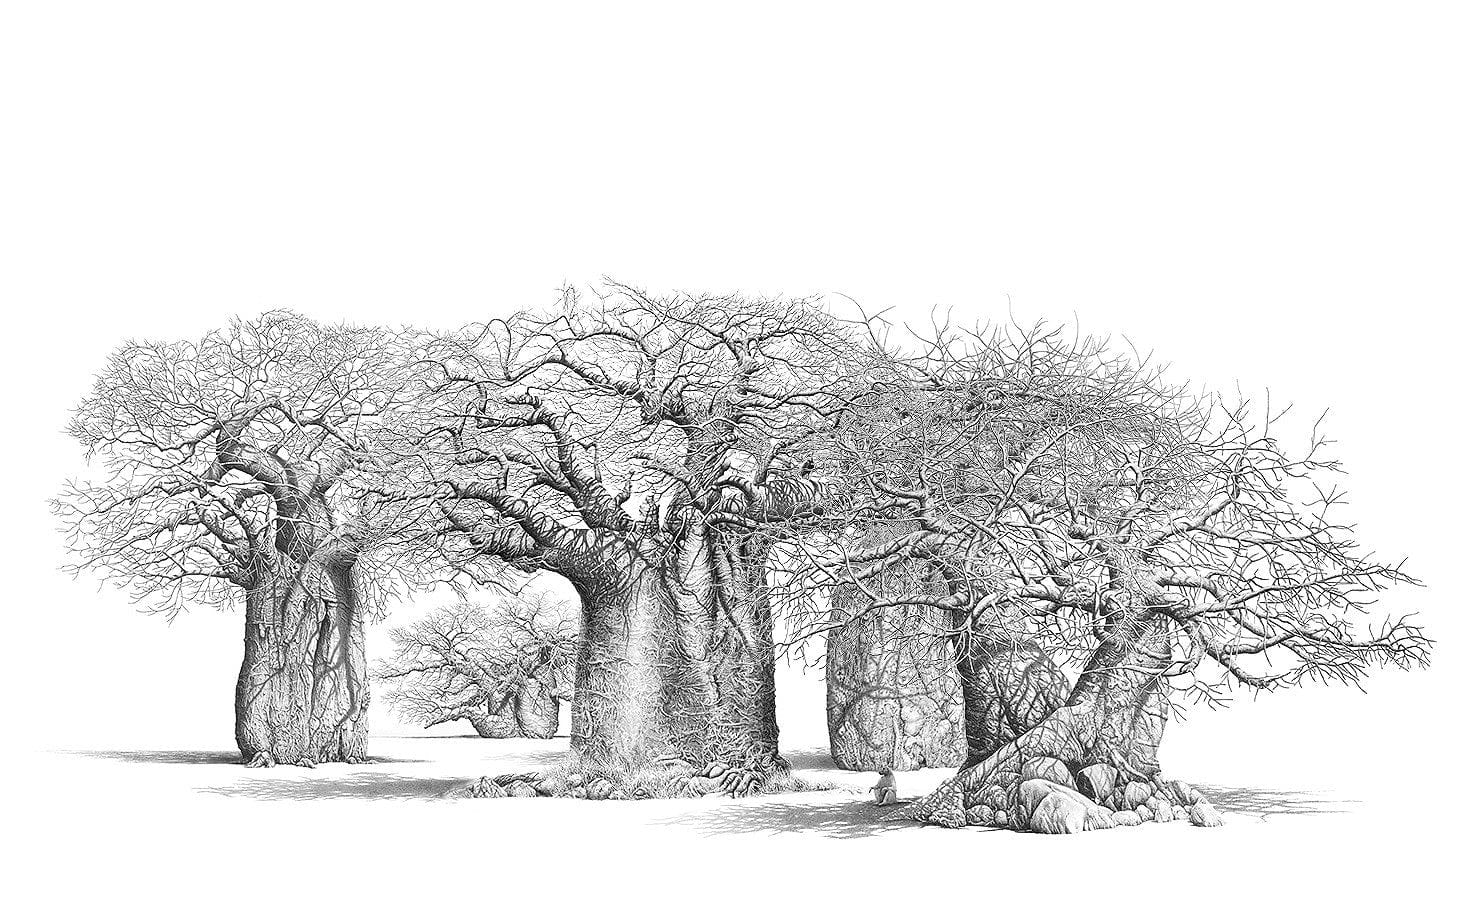 South African Limited Editions by Bowen Boshier - Baobab Trees - The Sacred Grove - Fine Art Portfolio